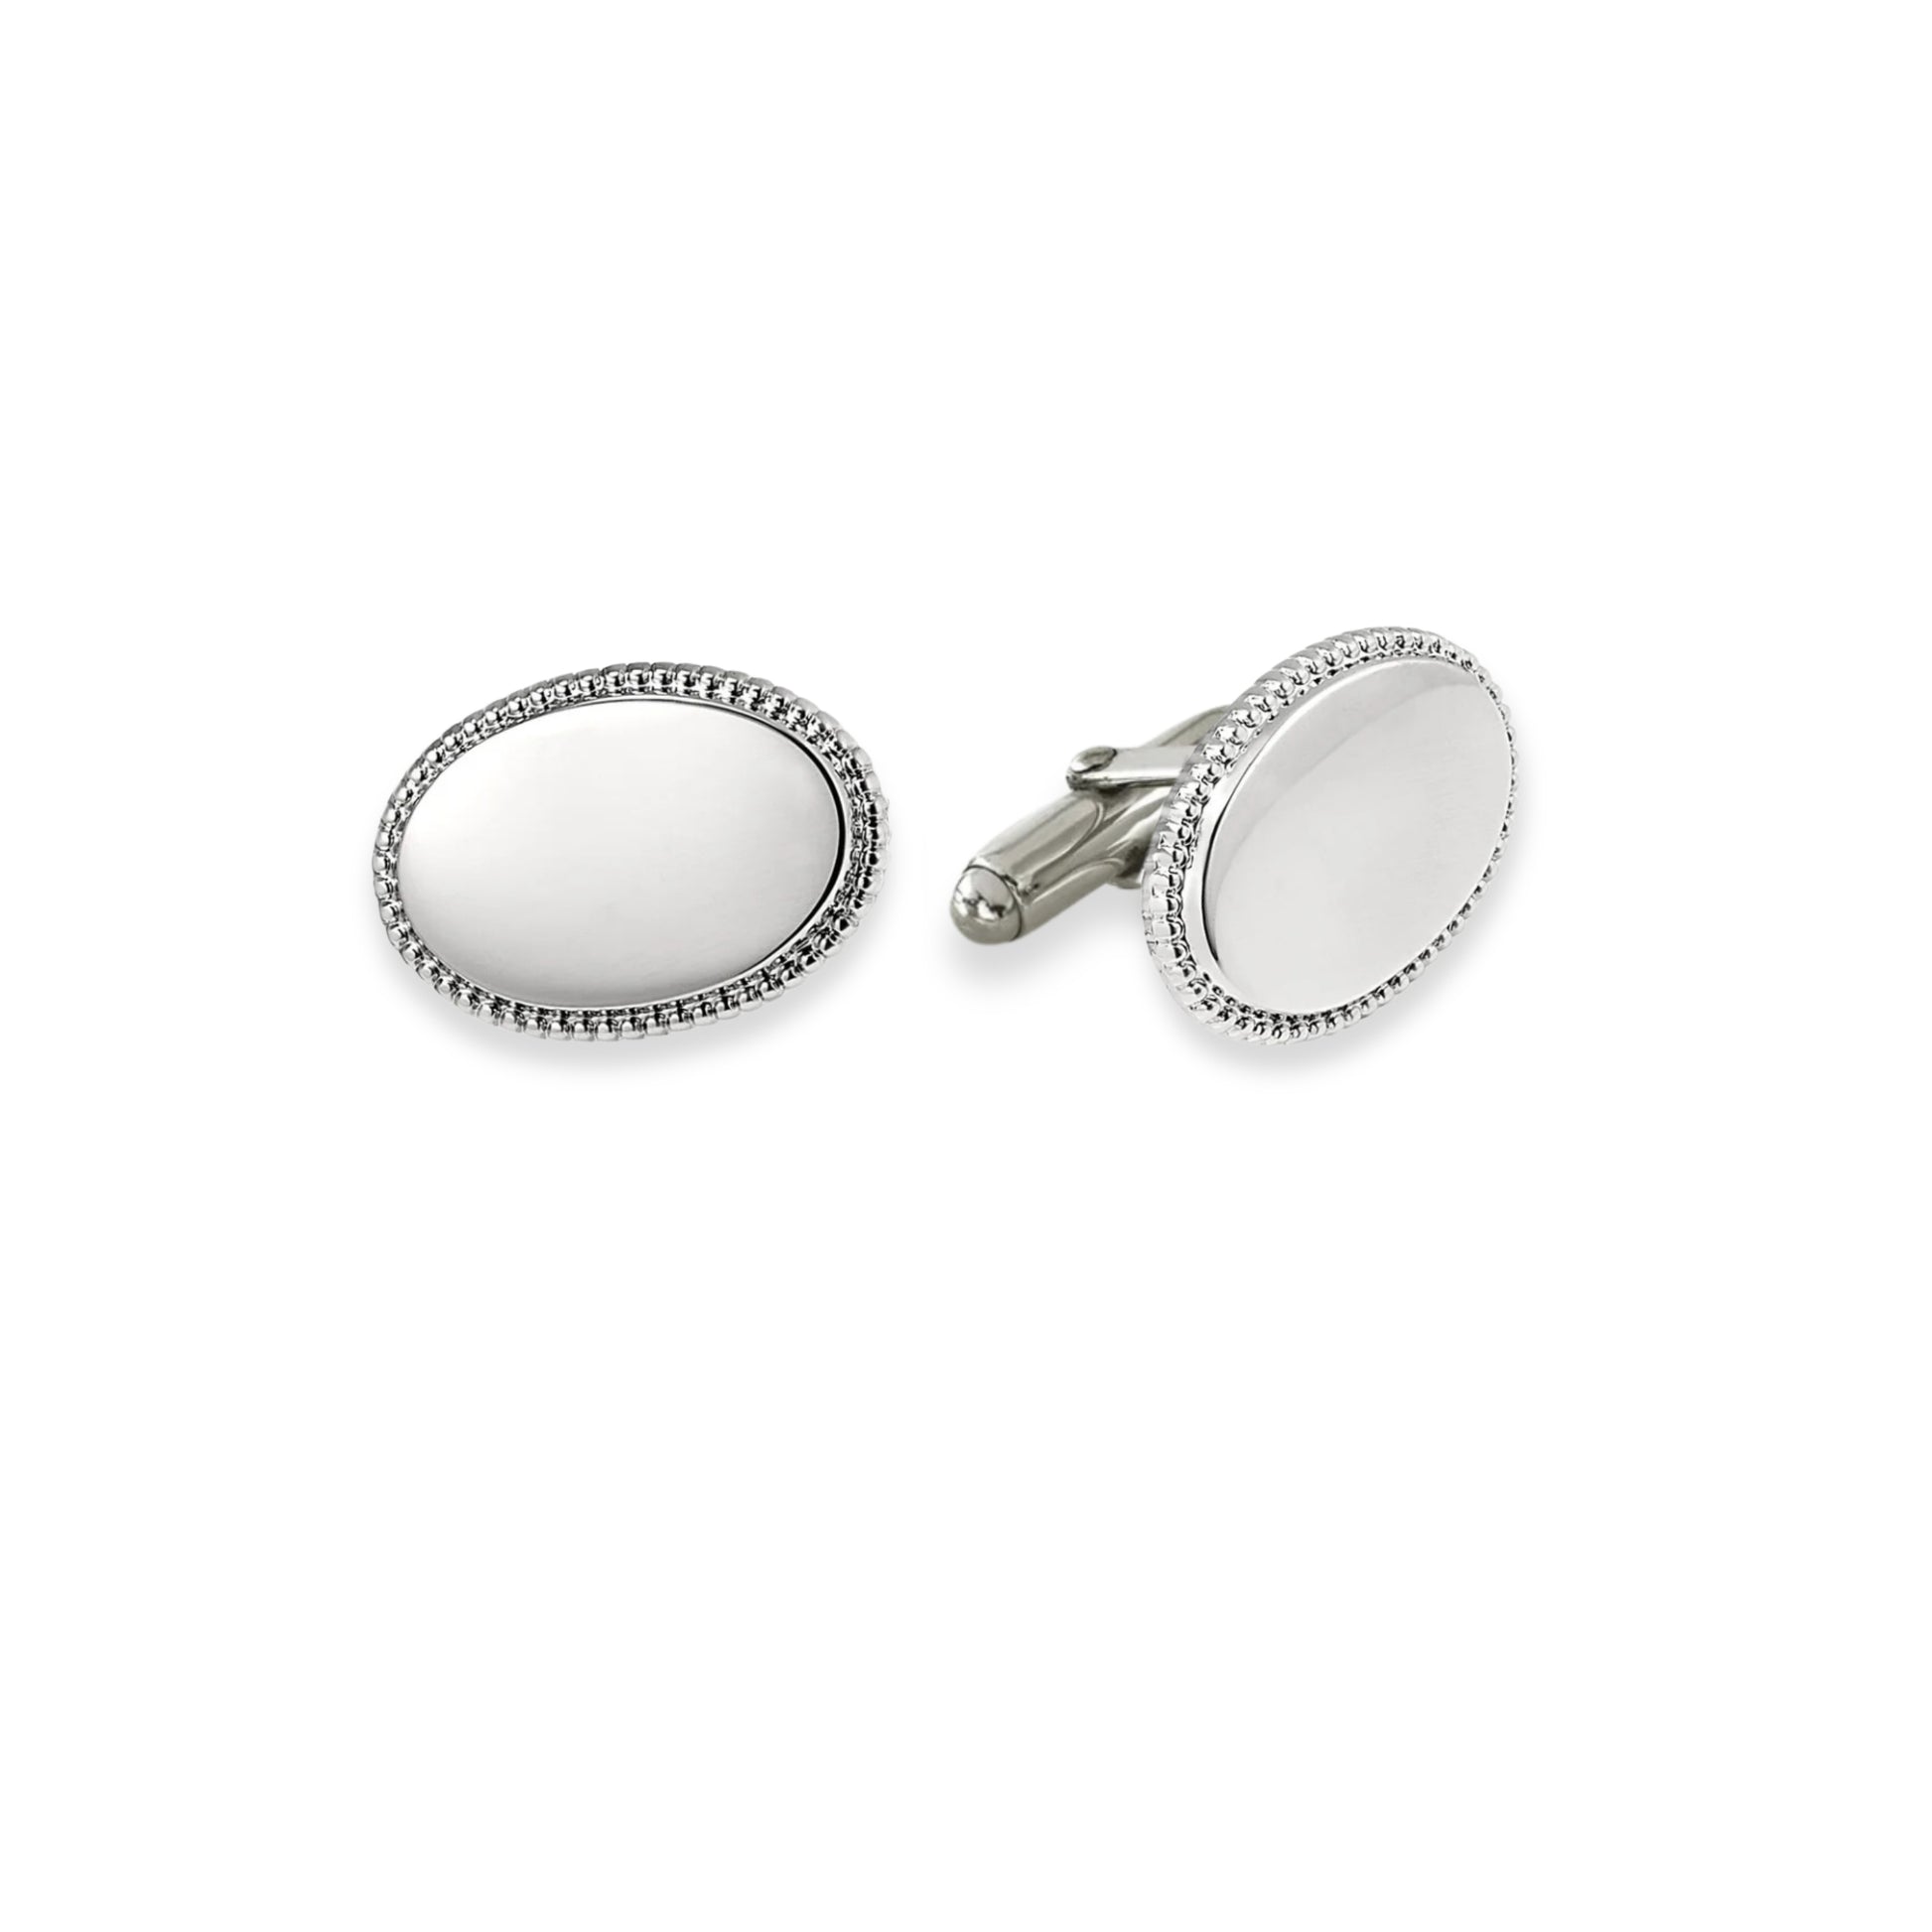 Sterling Silver Oval Cufflinks with Beaded Edge